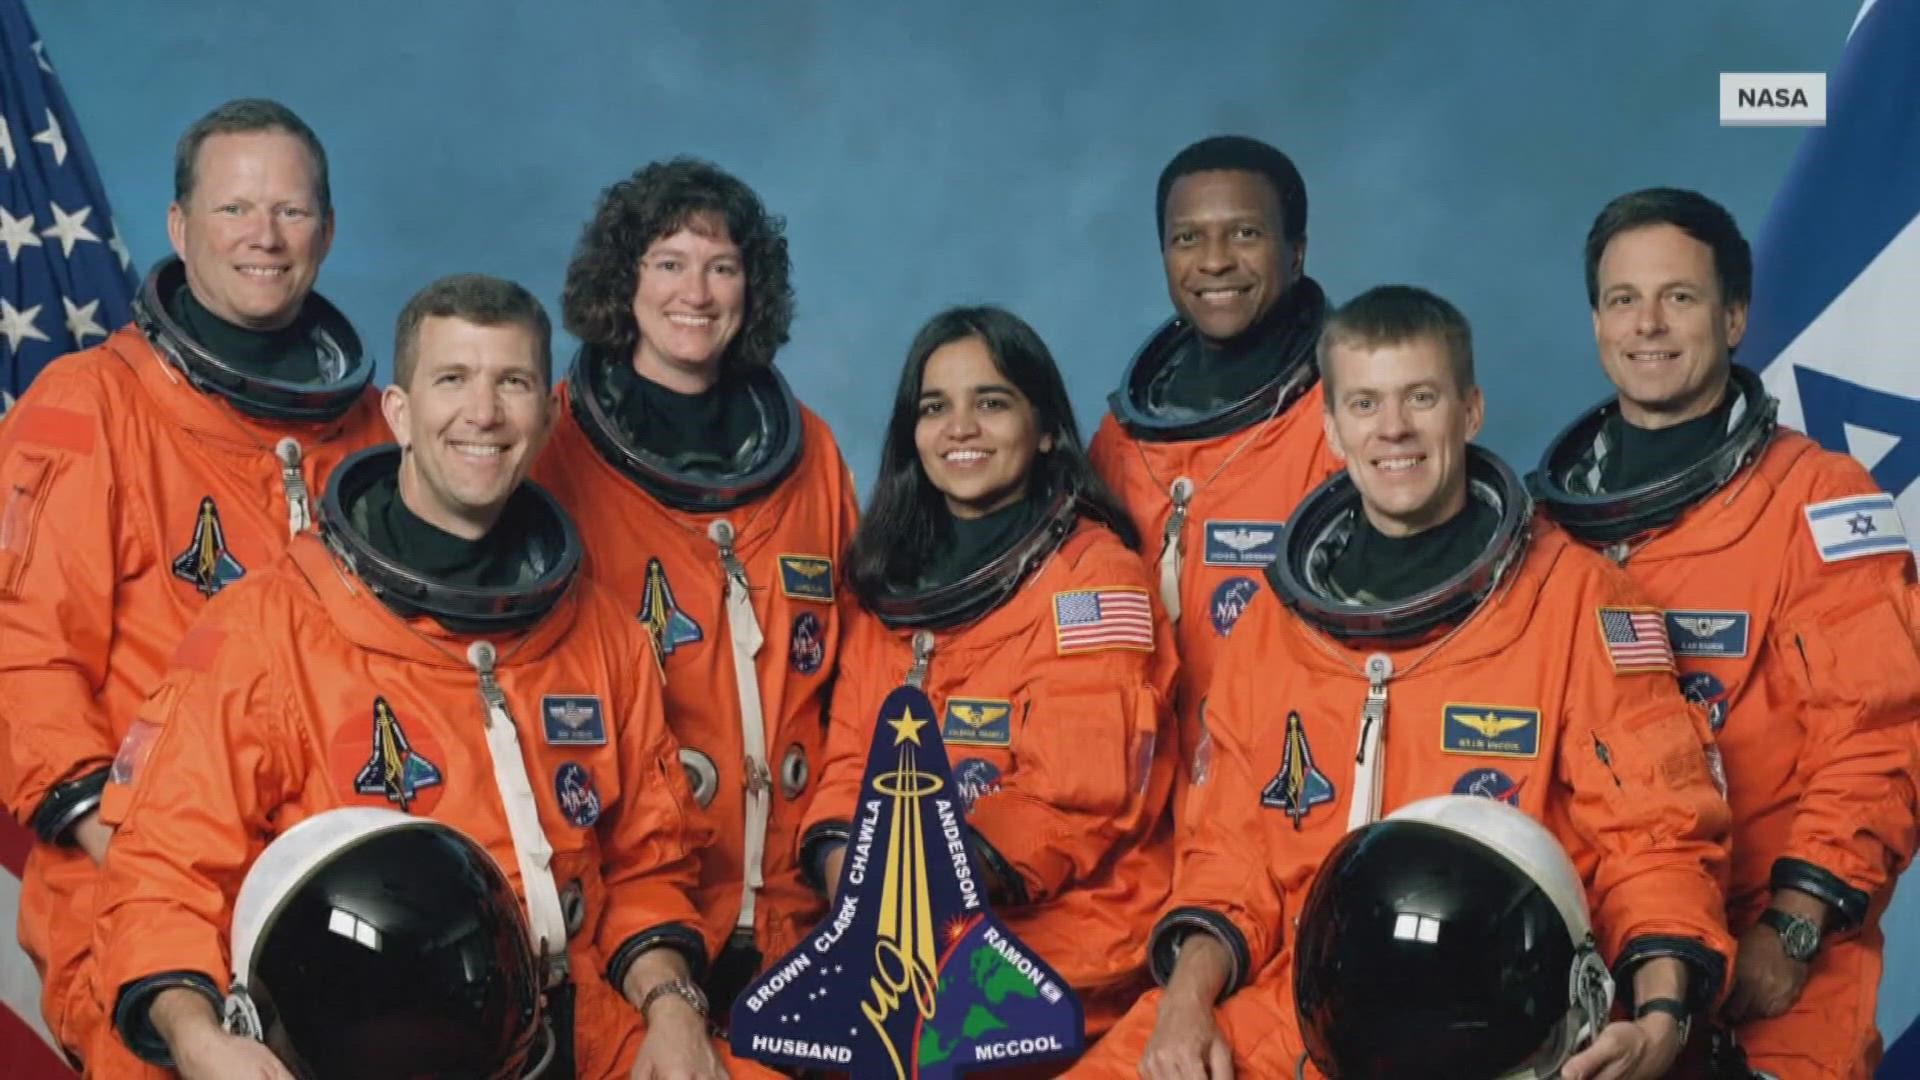 Today, we remember the space shuttle Colombia disaster that happened almost 20 years ago.